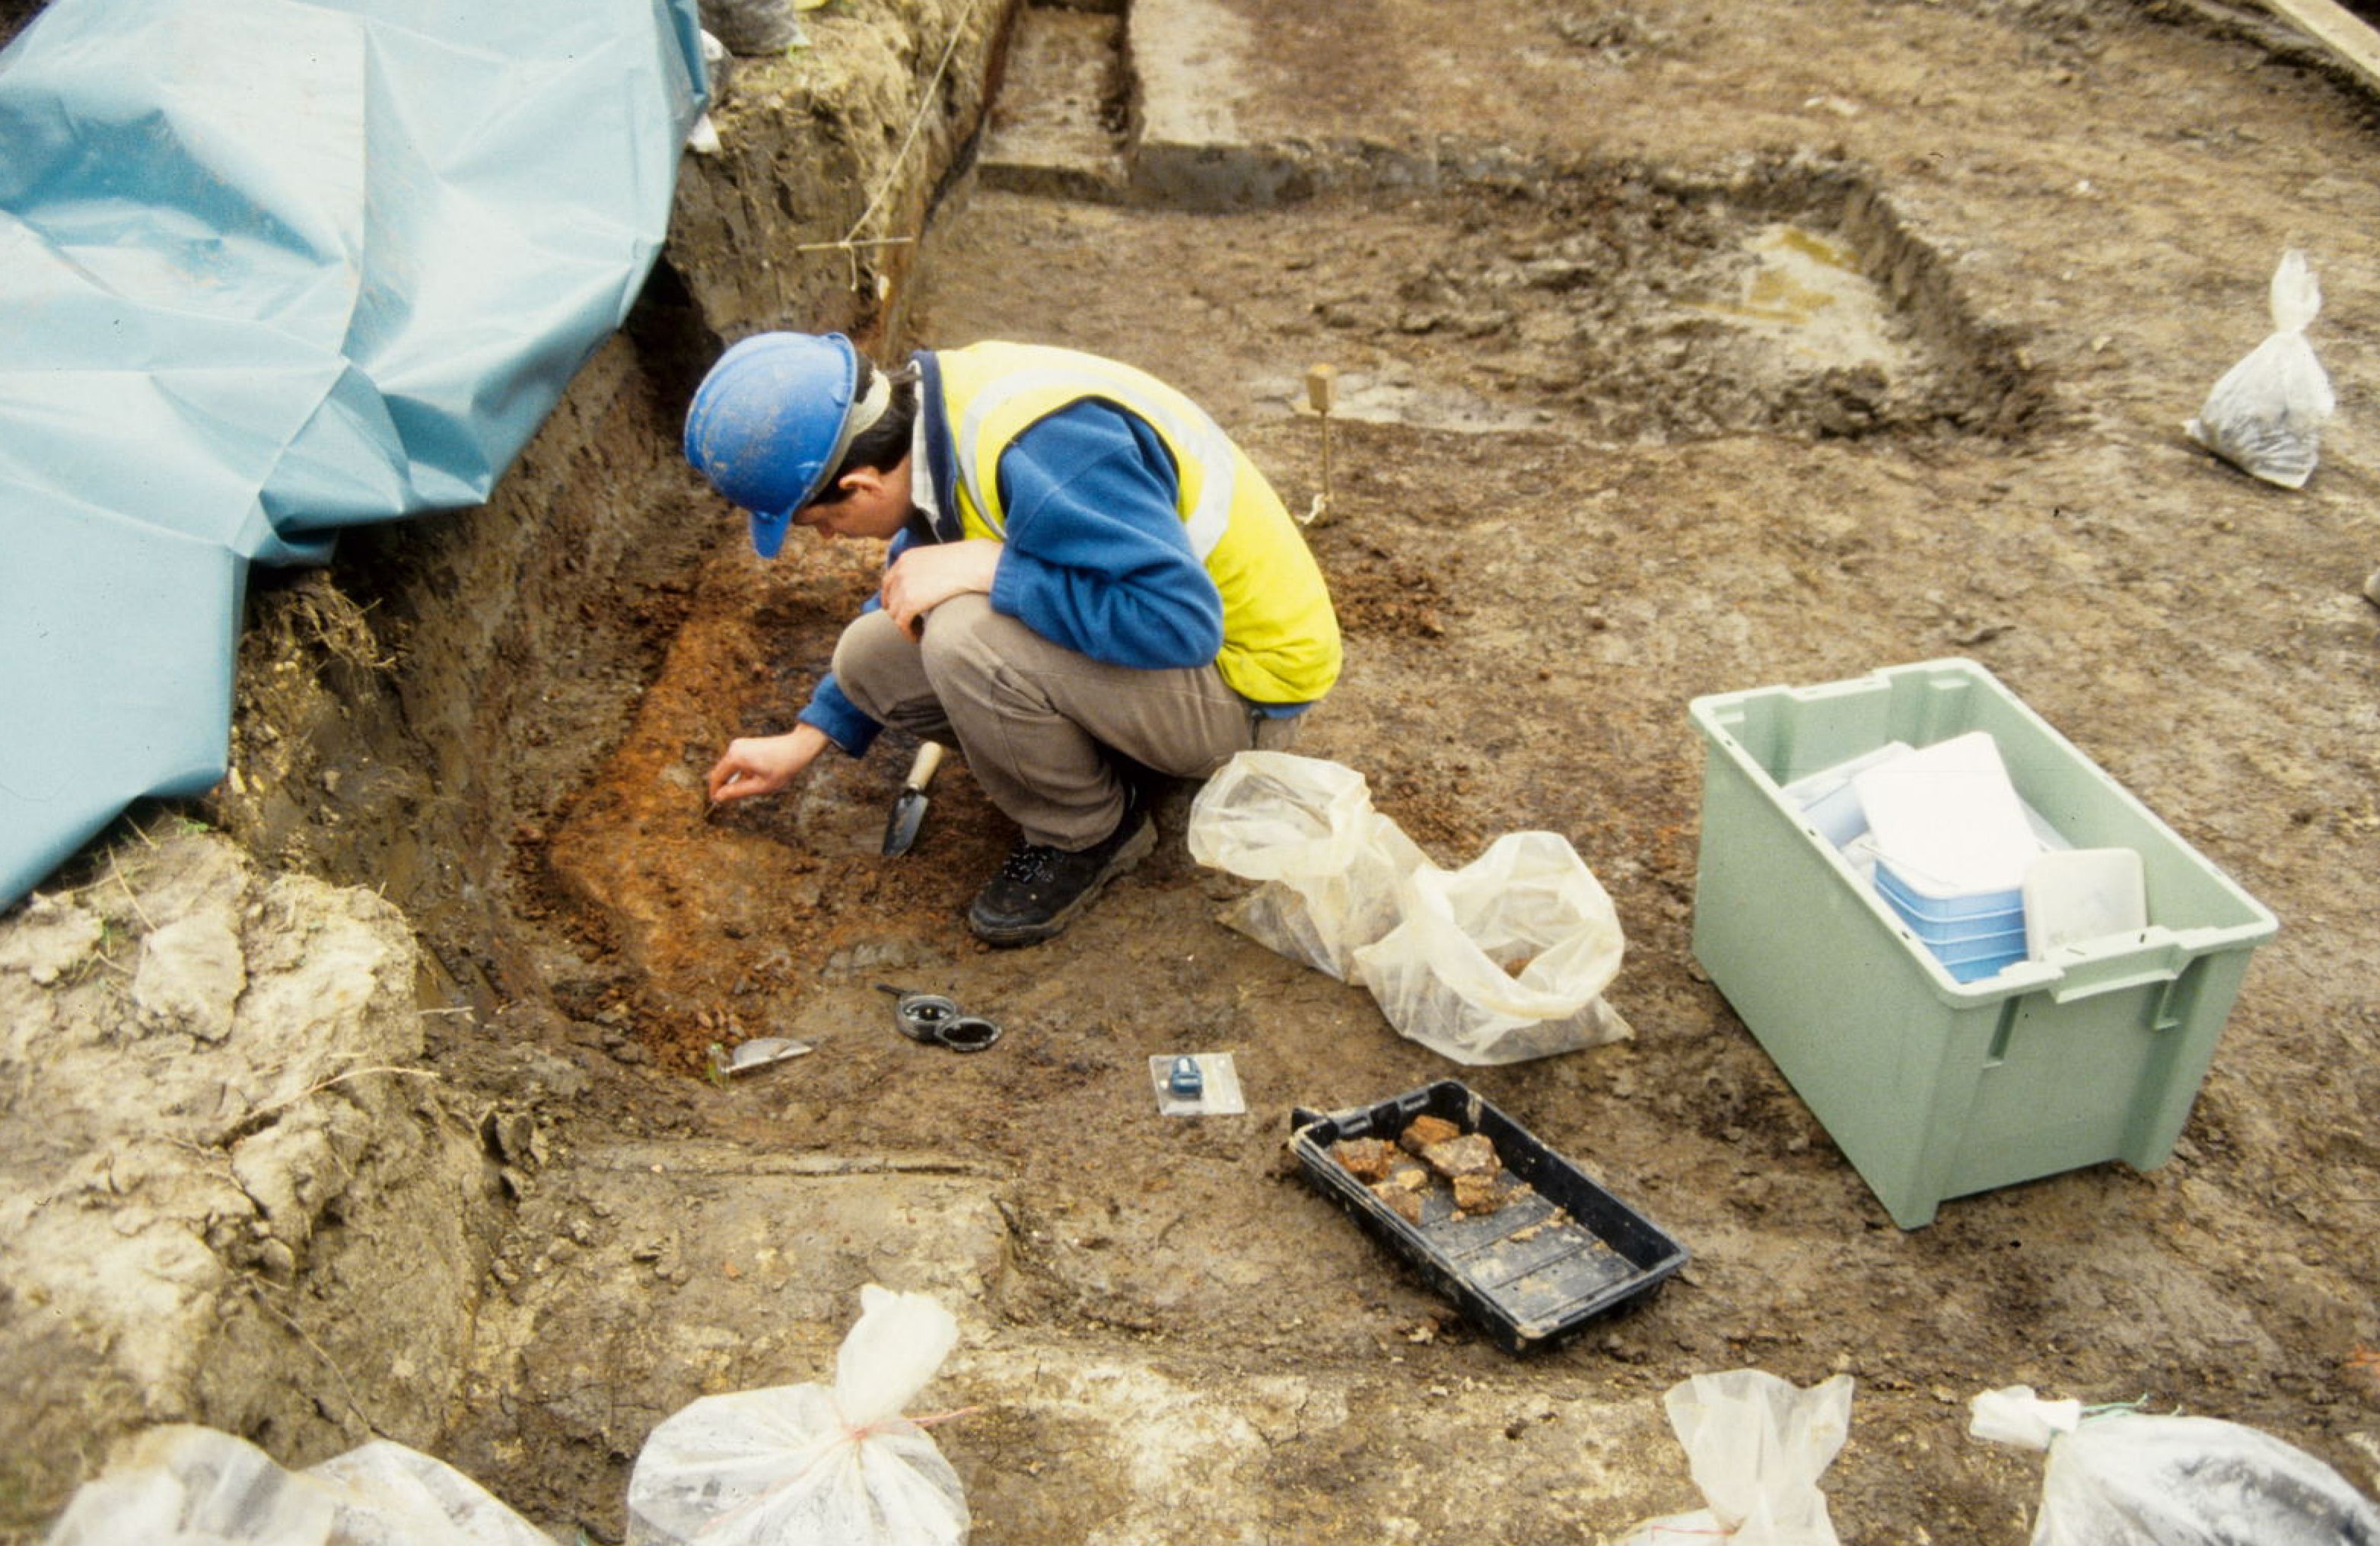 A photograph of a large archaeological dig site where a person, surrounded by equipment, works on some exposed deposits.